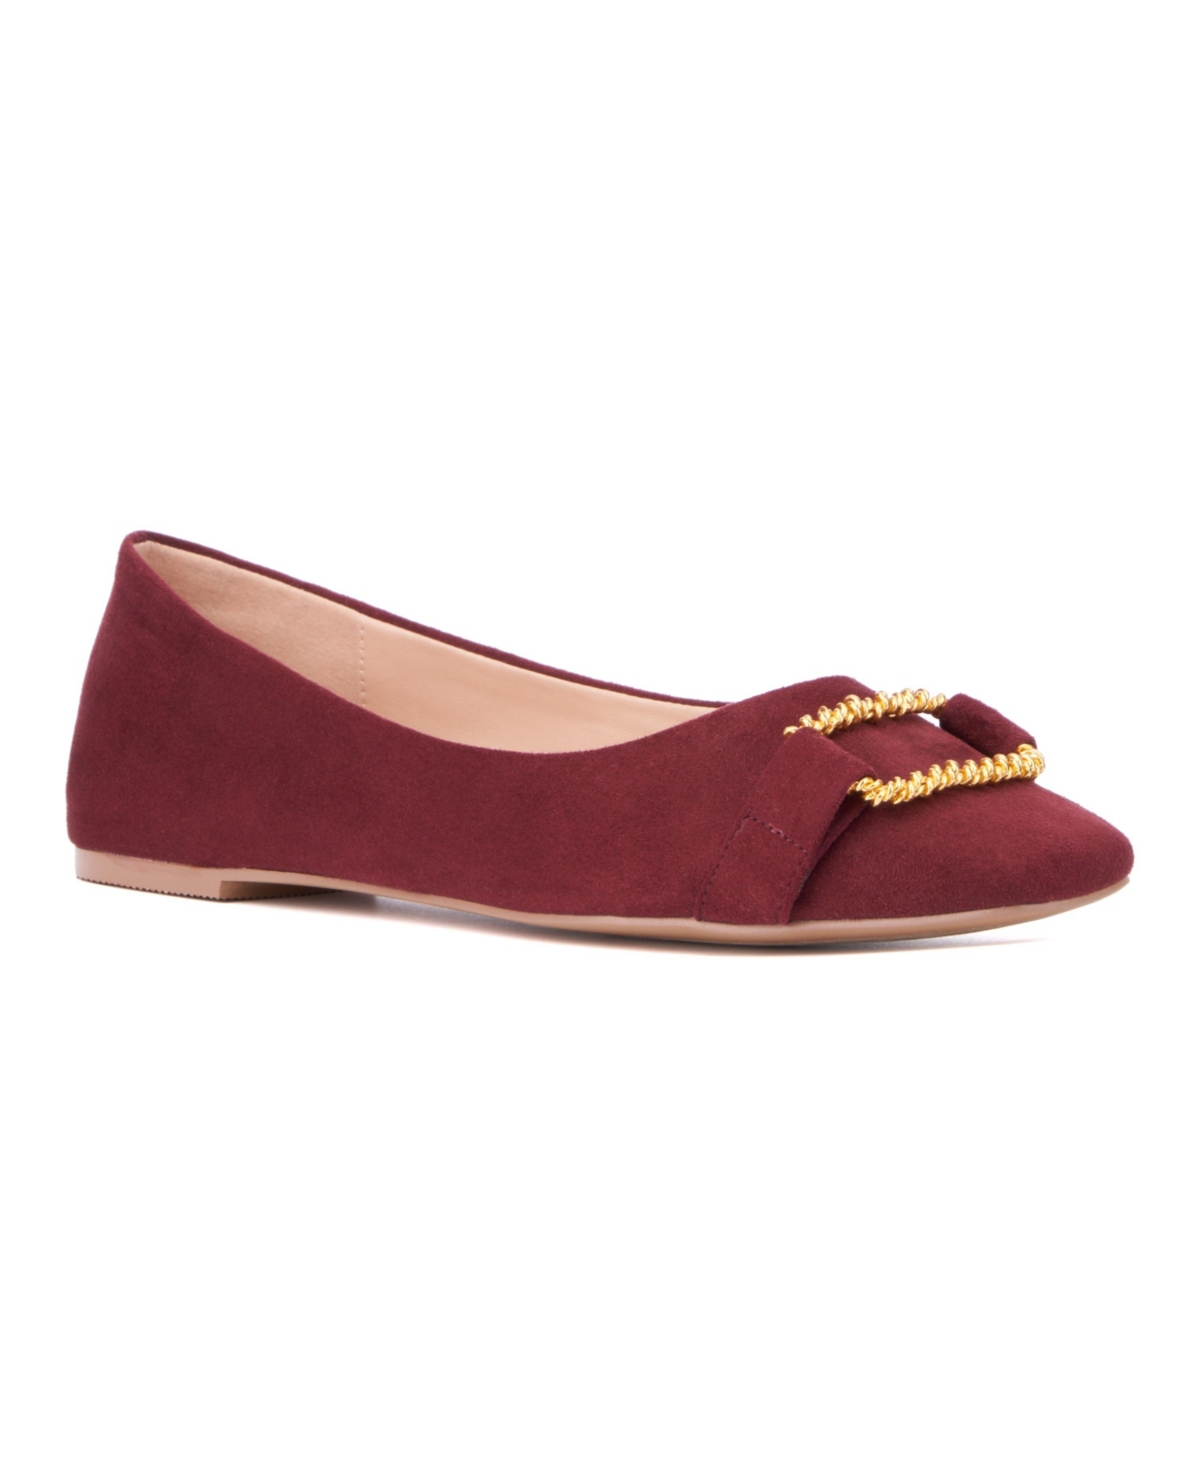 NEW YORK AND COMPANY WOMEN'S NIARA- FLATS WITH GOLD HARDWARE ACCENT